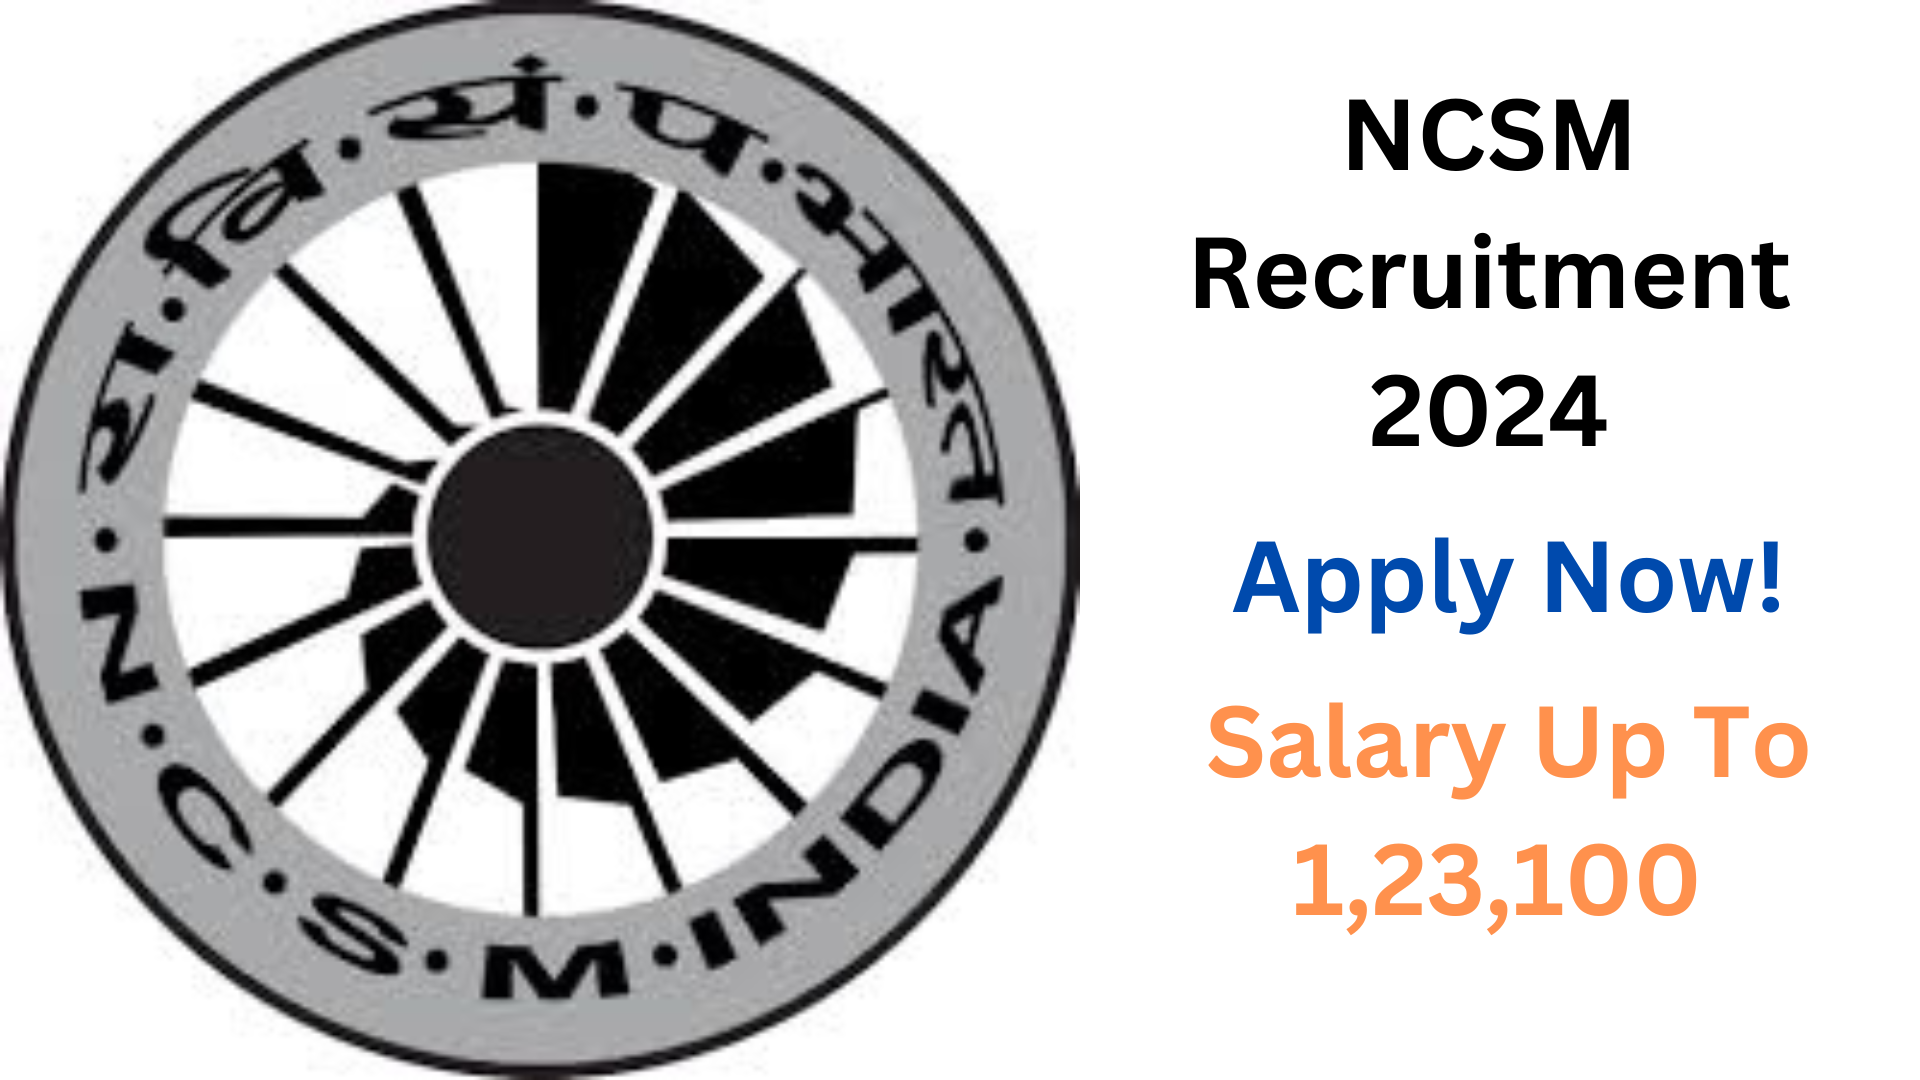 NCSM Recruitment 2024, Apply Now, Check Latest Vacancy Details, Eligibility Criteria, and More